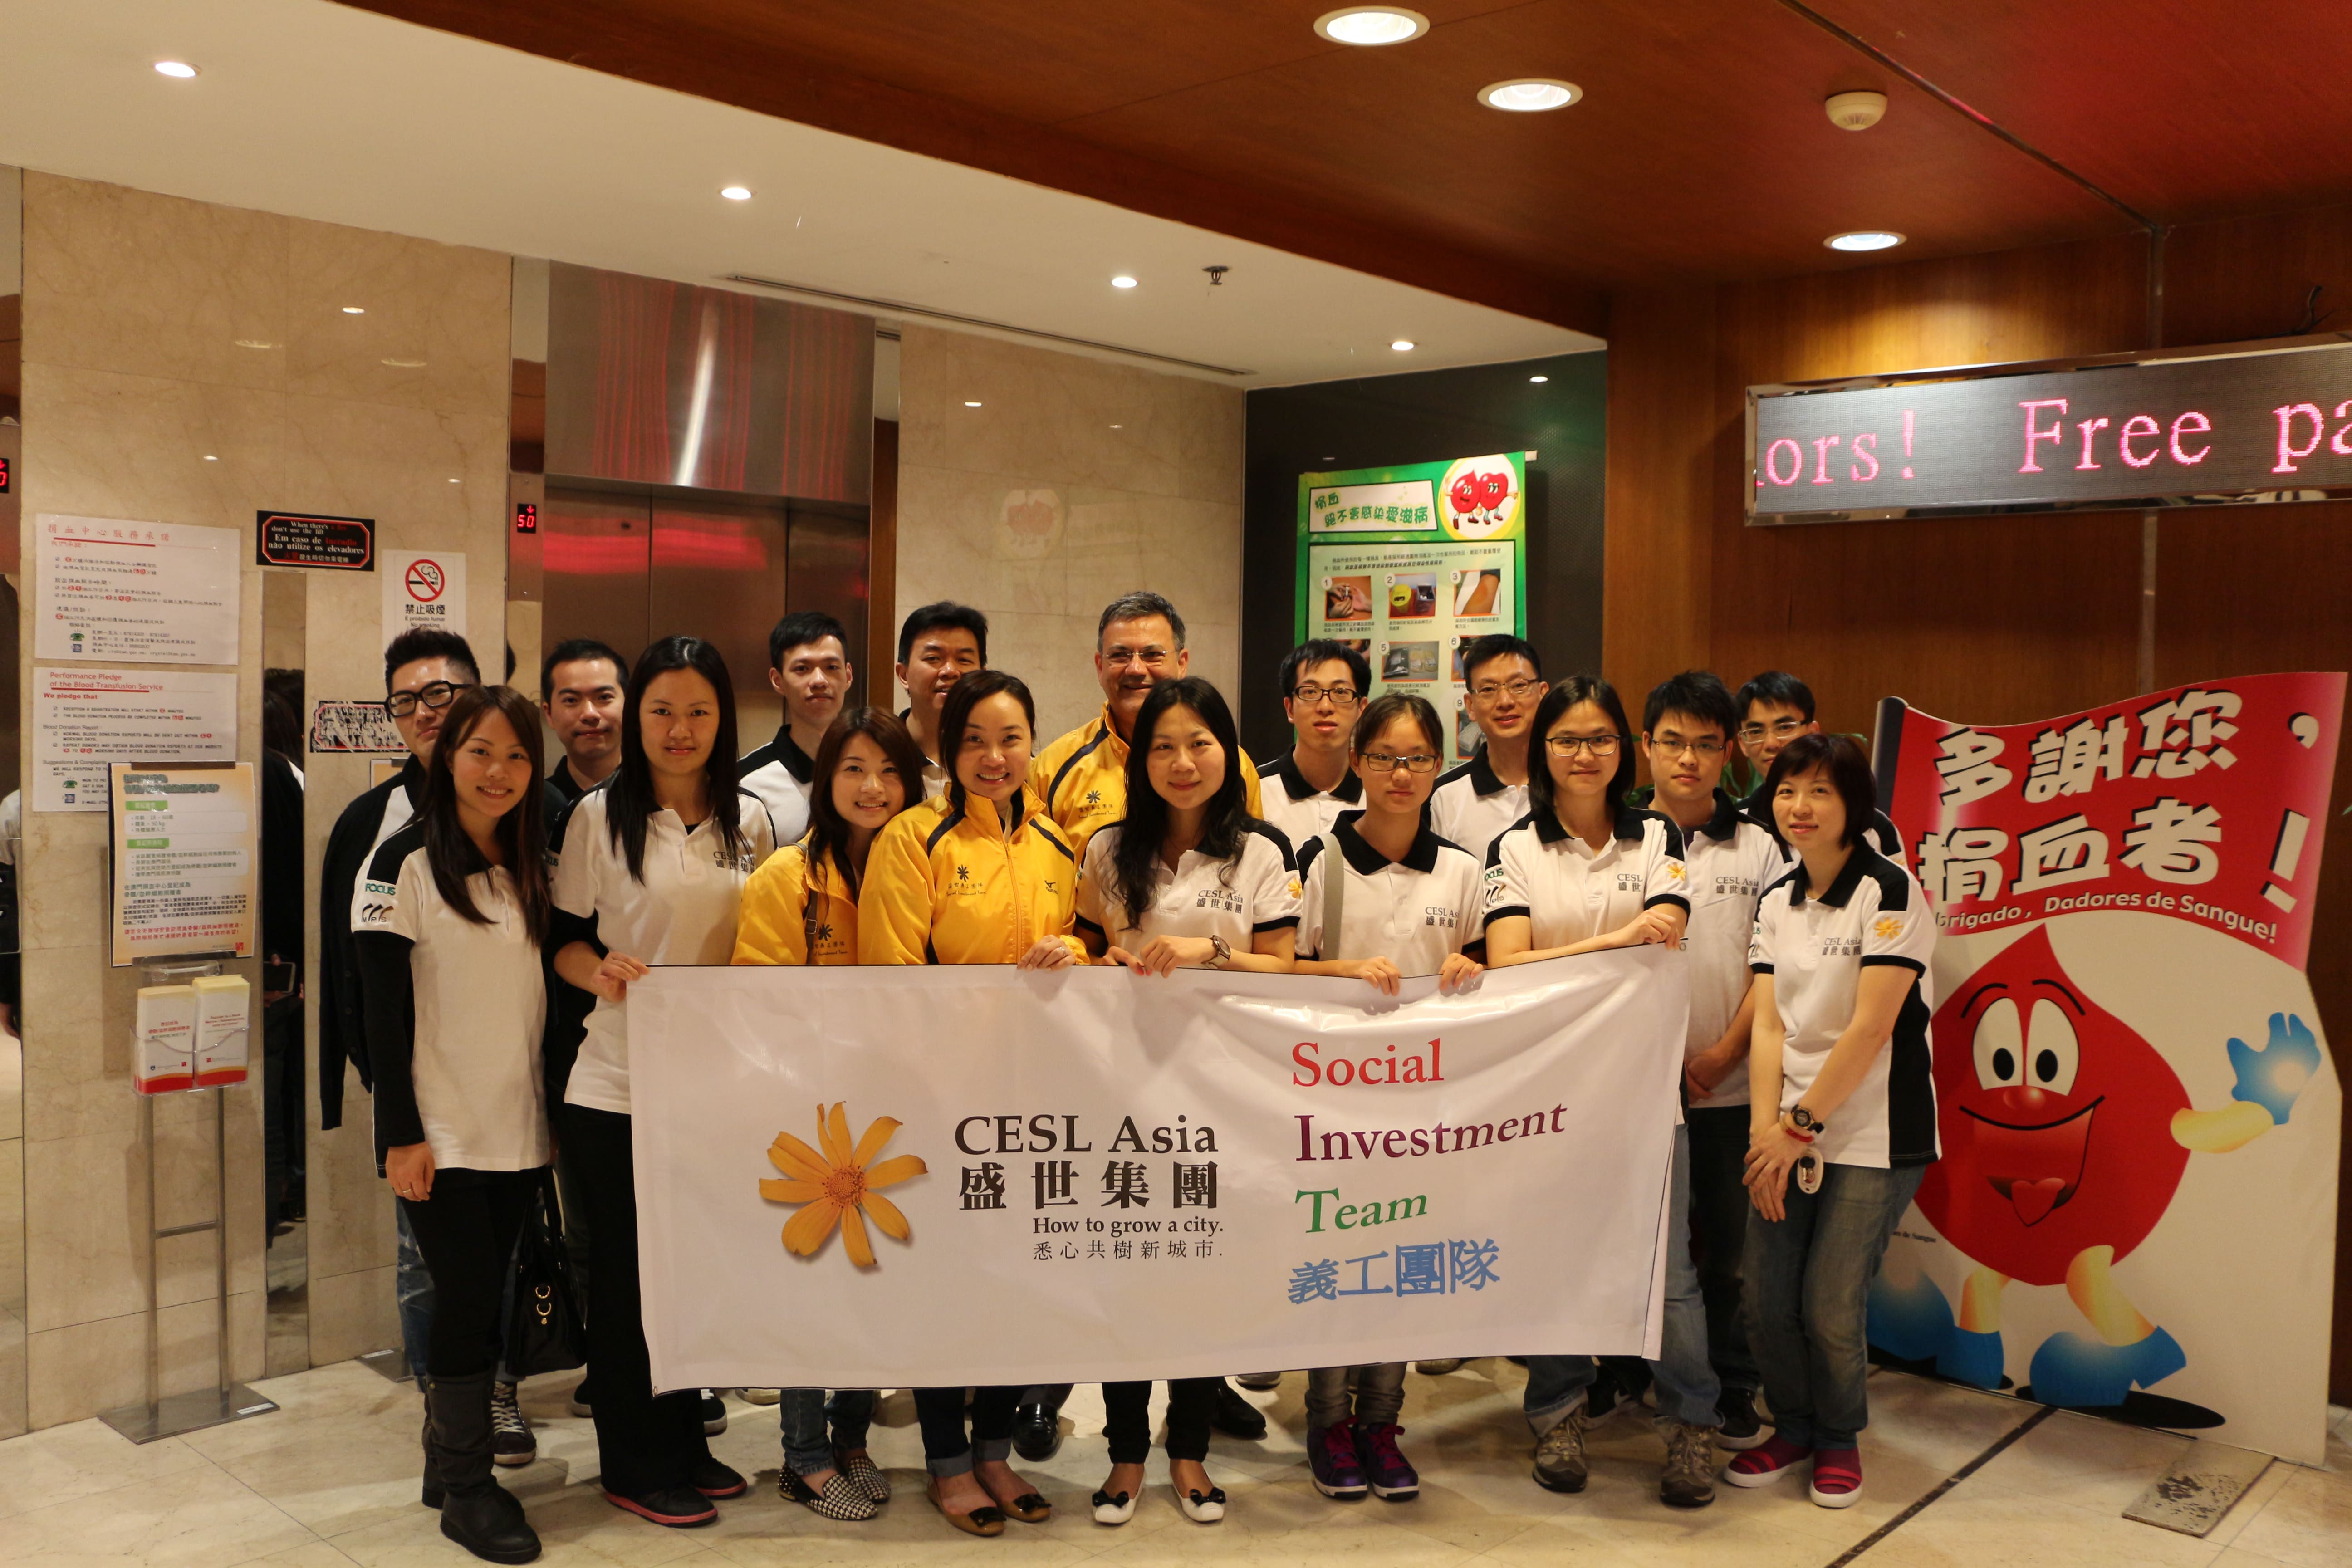 CESL Asia encourages its staff to promote social responsibility through blood donation activity